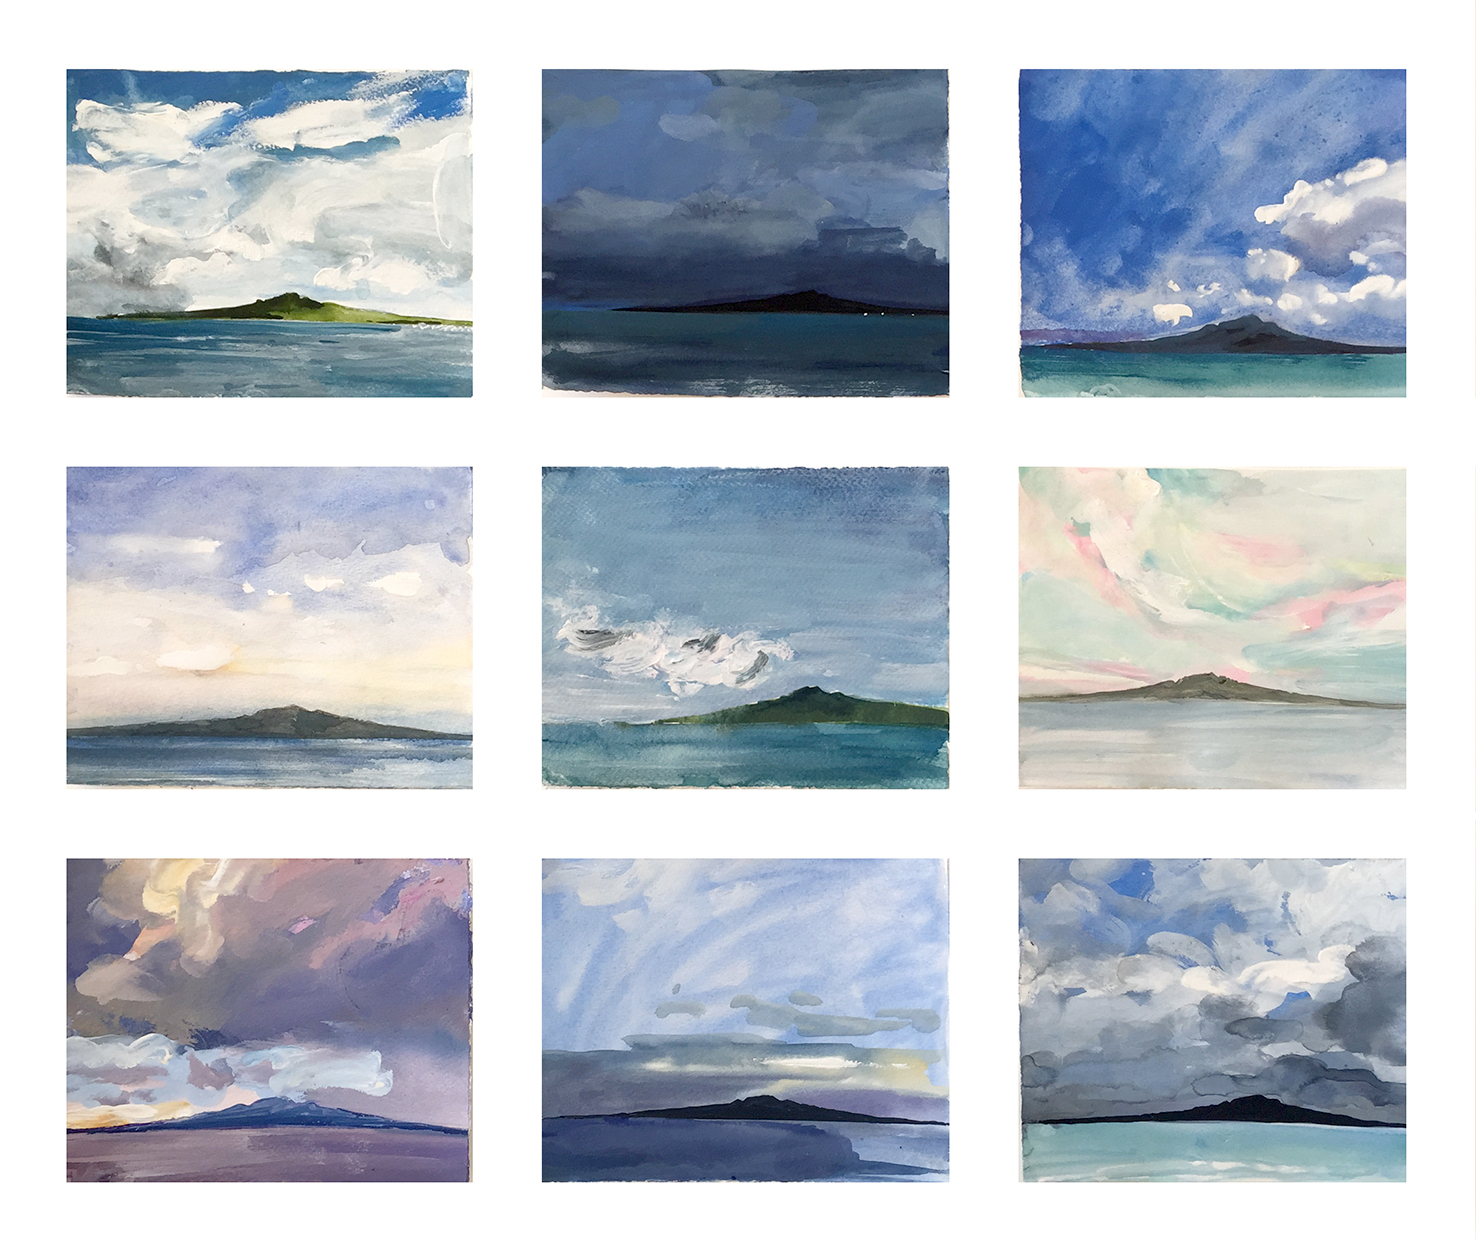 Rangitoto studies of weather and light # 2 framed series of 9 originals